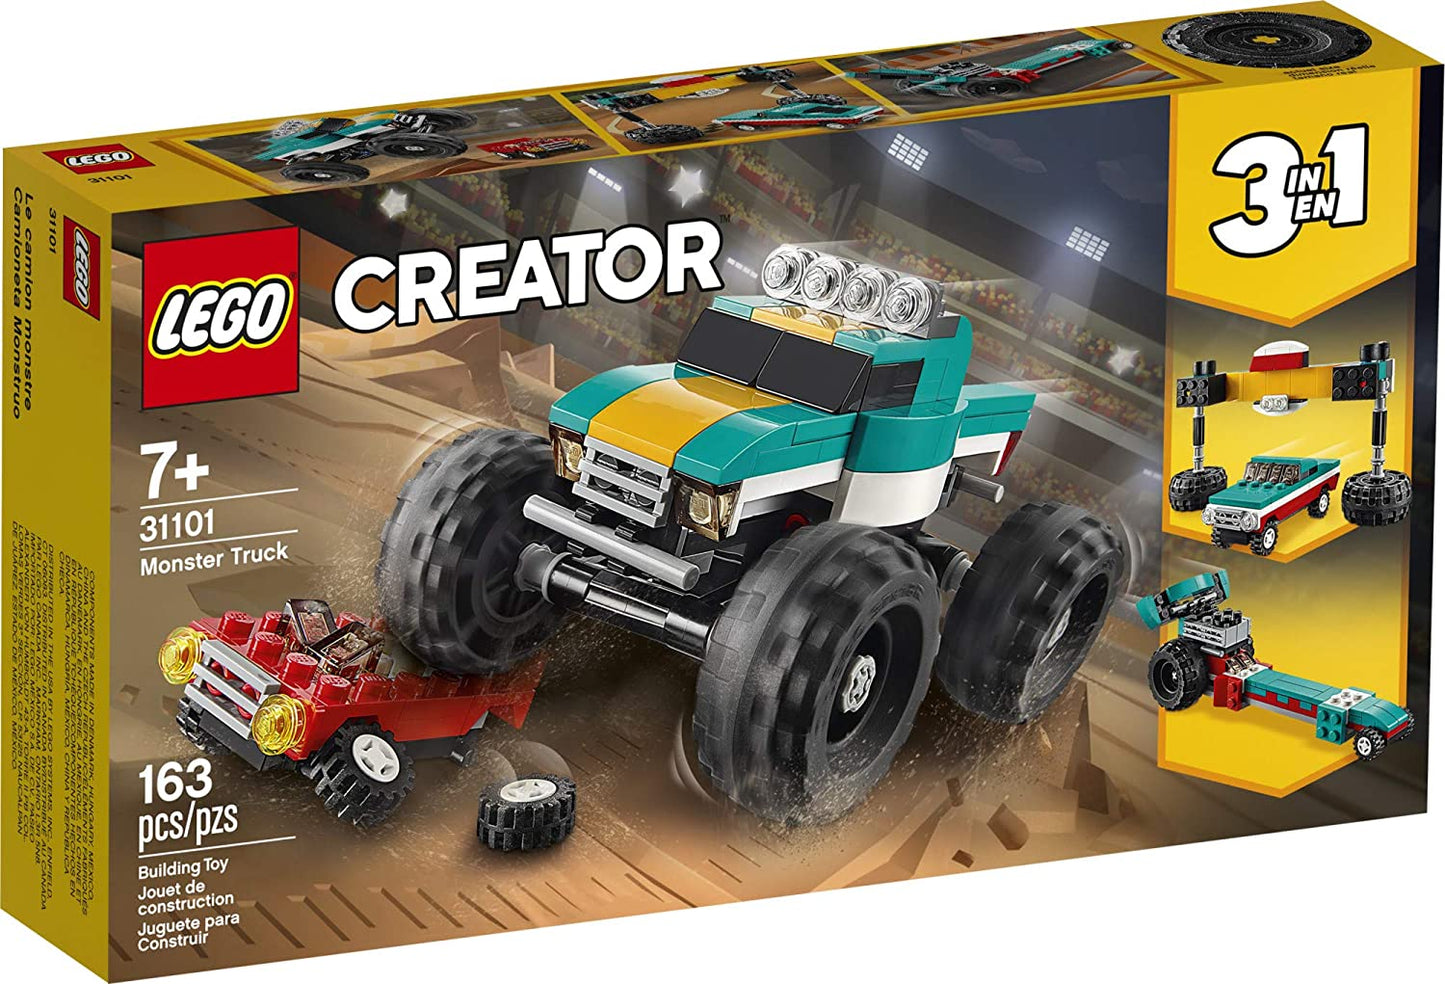 LEGO Creator - 3in1 Monster Truck Toy 31101